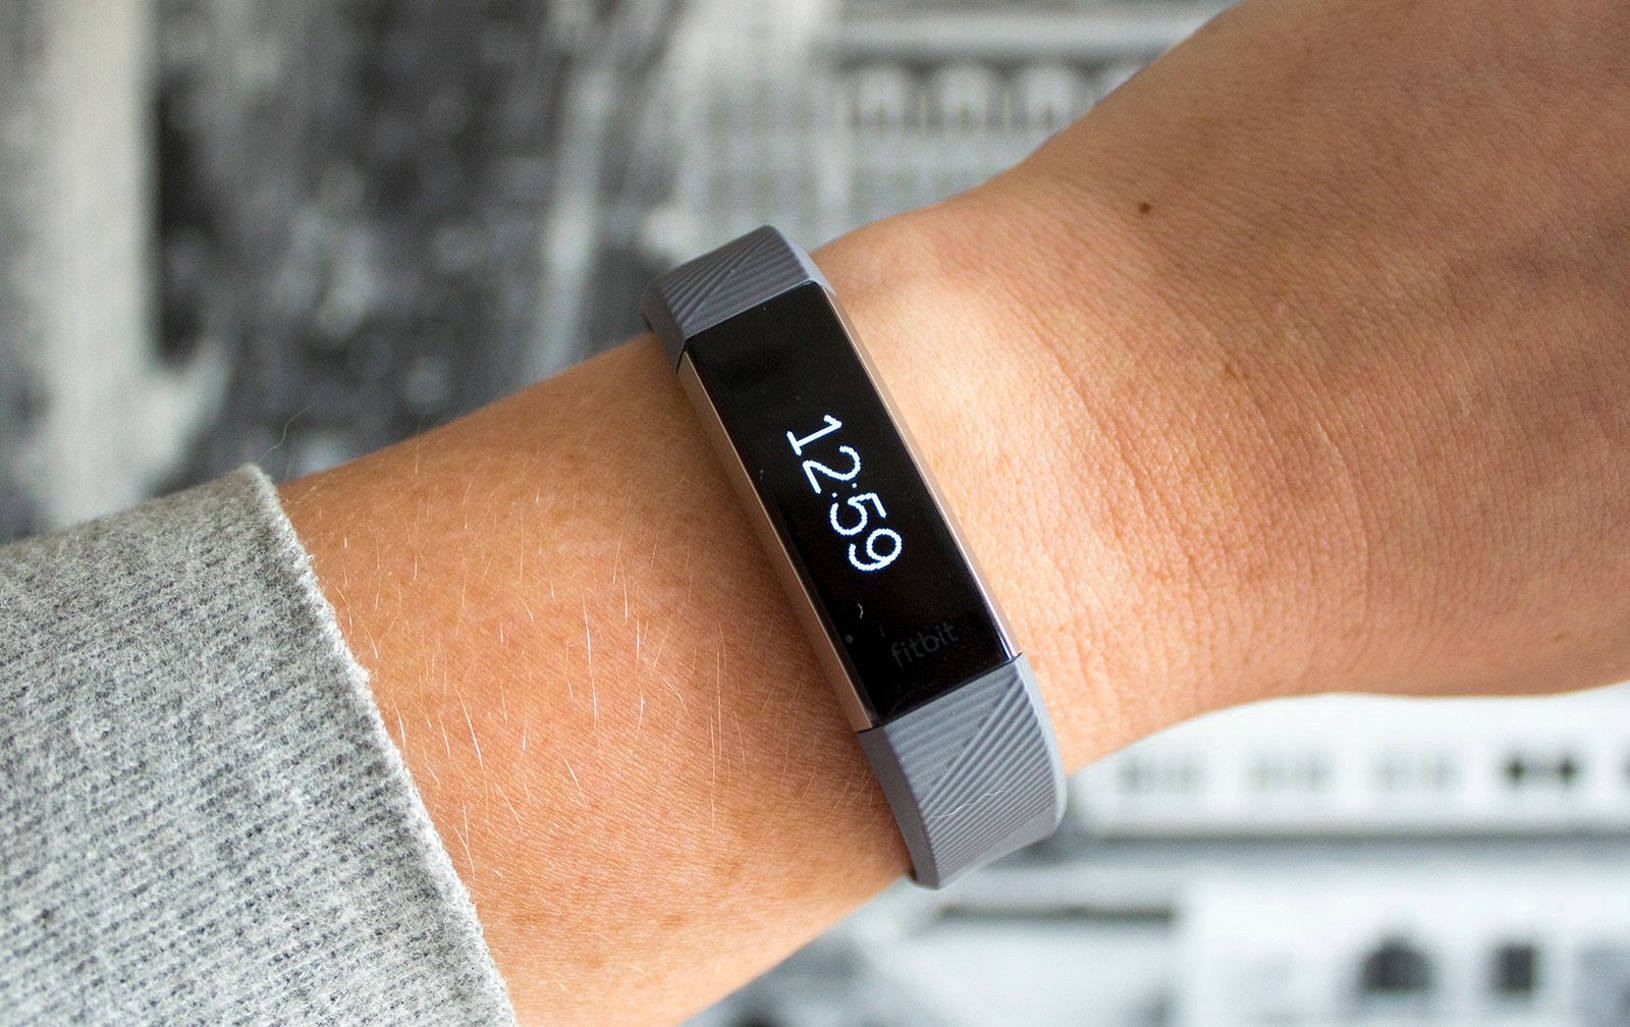 Finding Fitbit Alta: A Guide To Purchase Locations